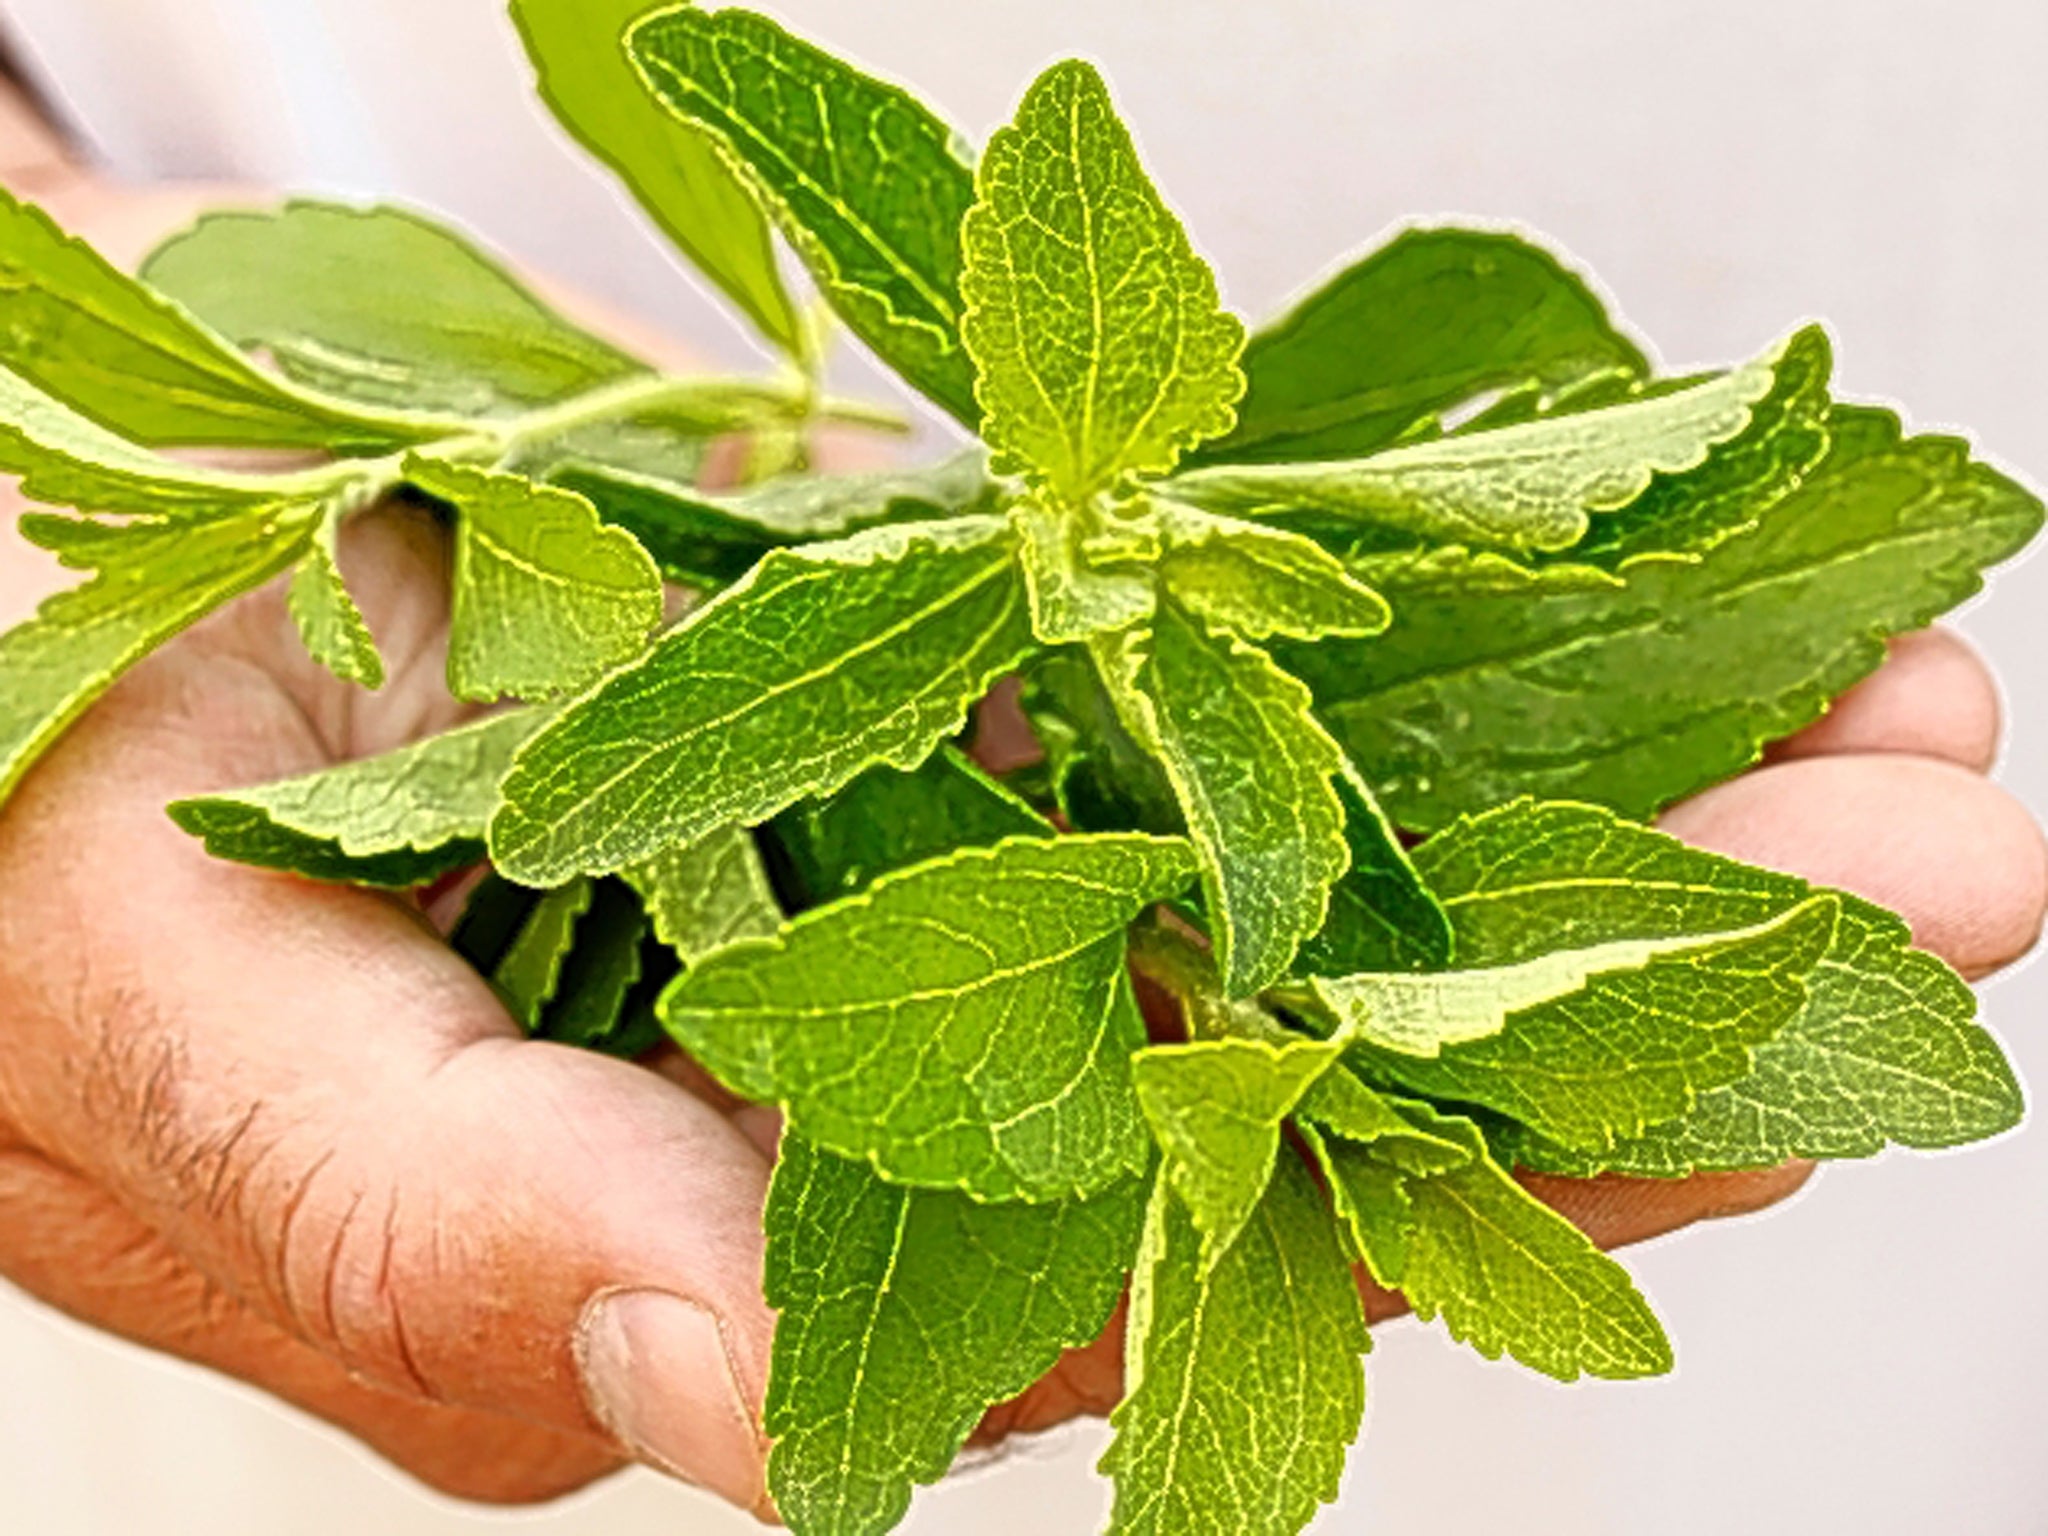 Sweet and low: the stevia plant, which grows in South America